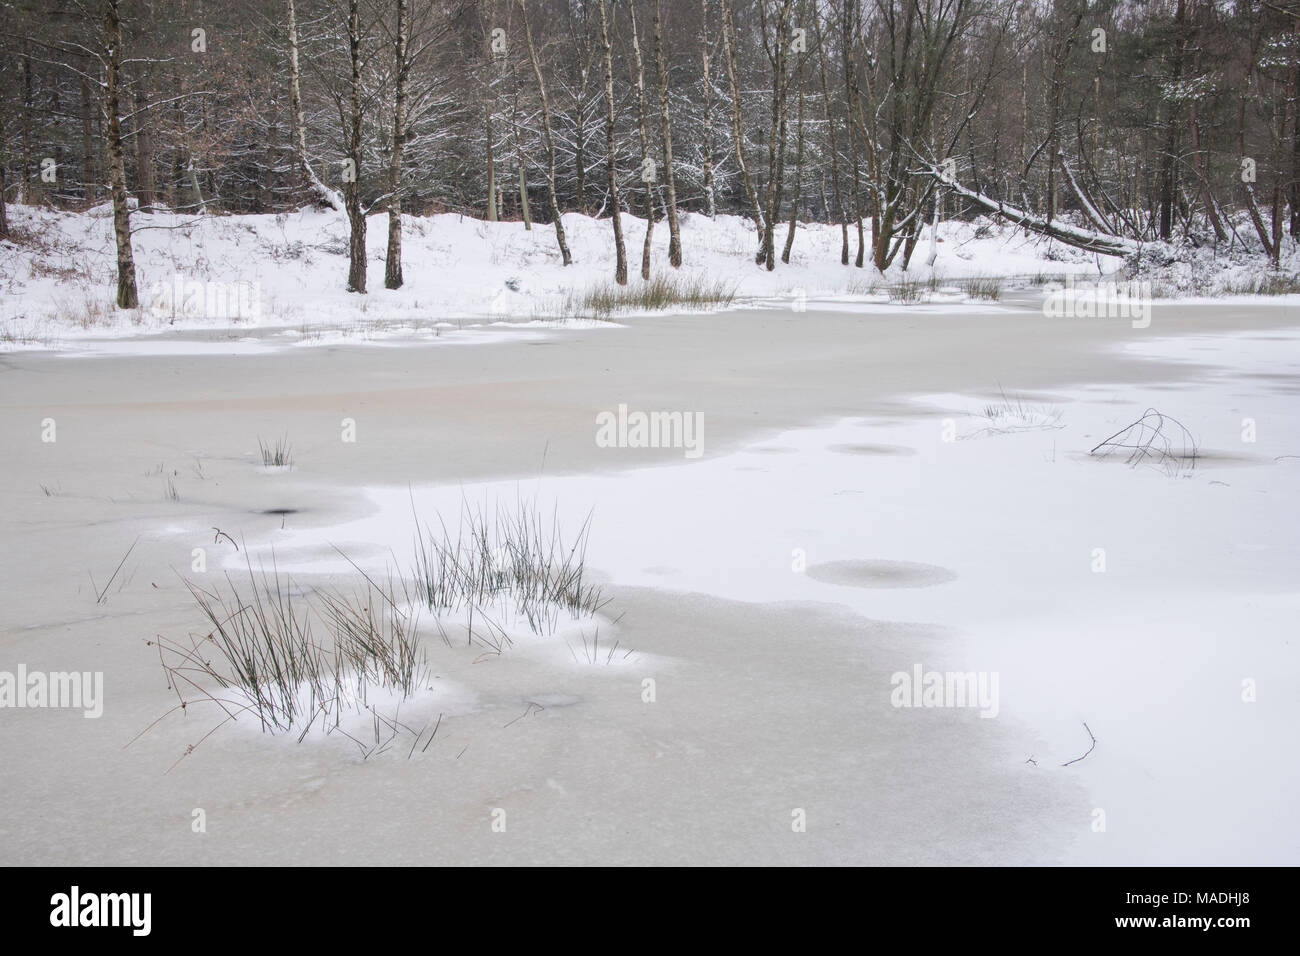 A snowy scene in the New Forest at Mogshade Hill. Stock Photo